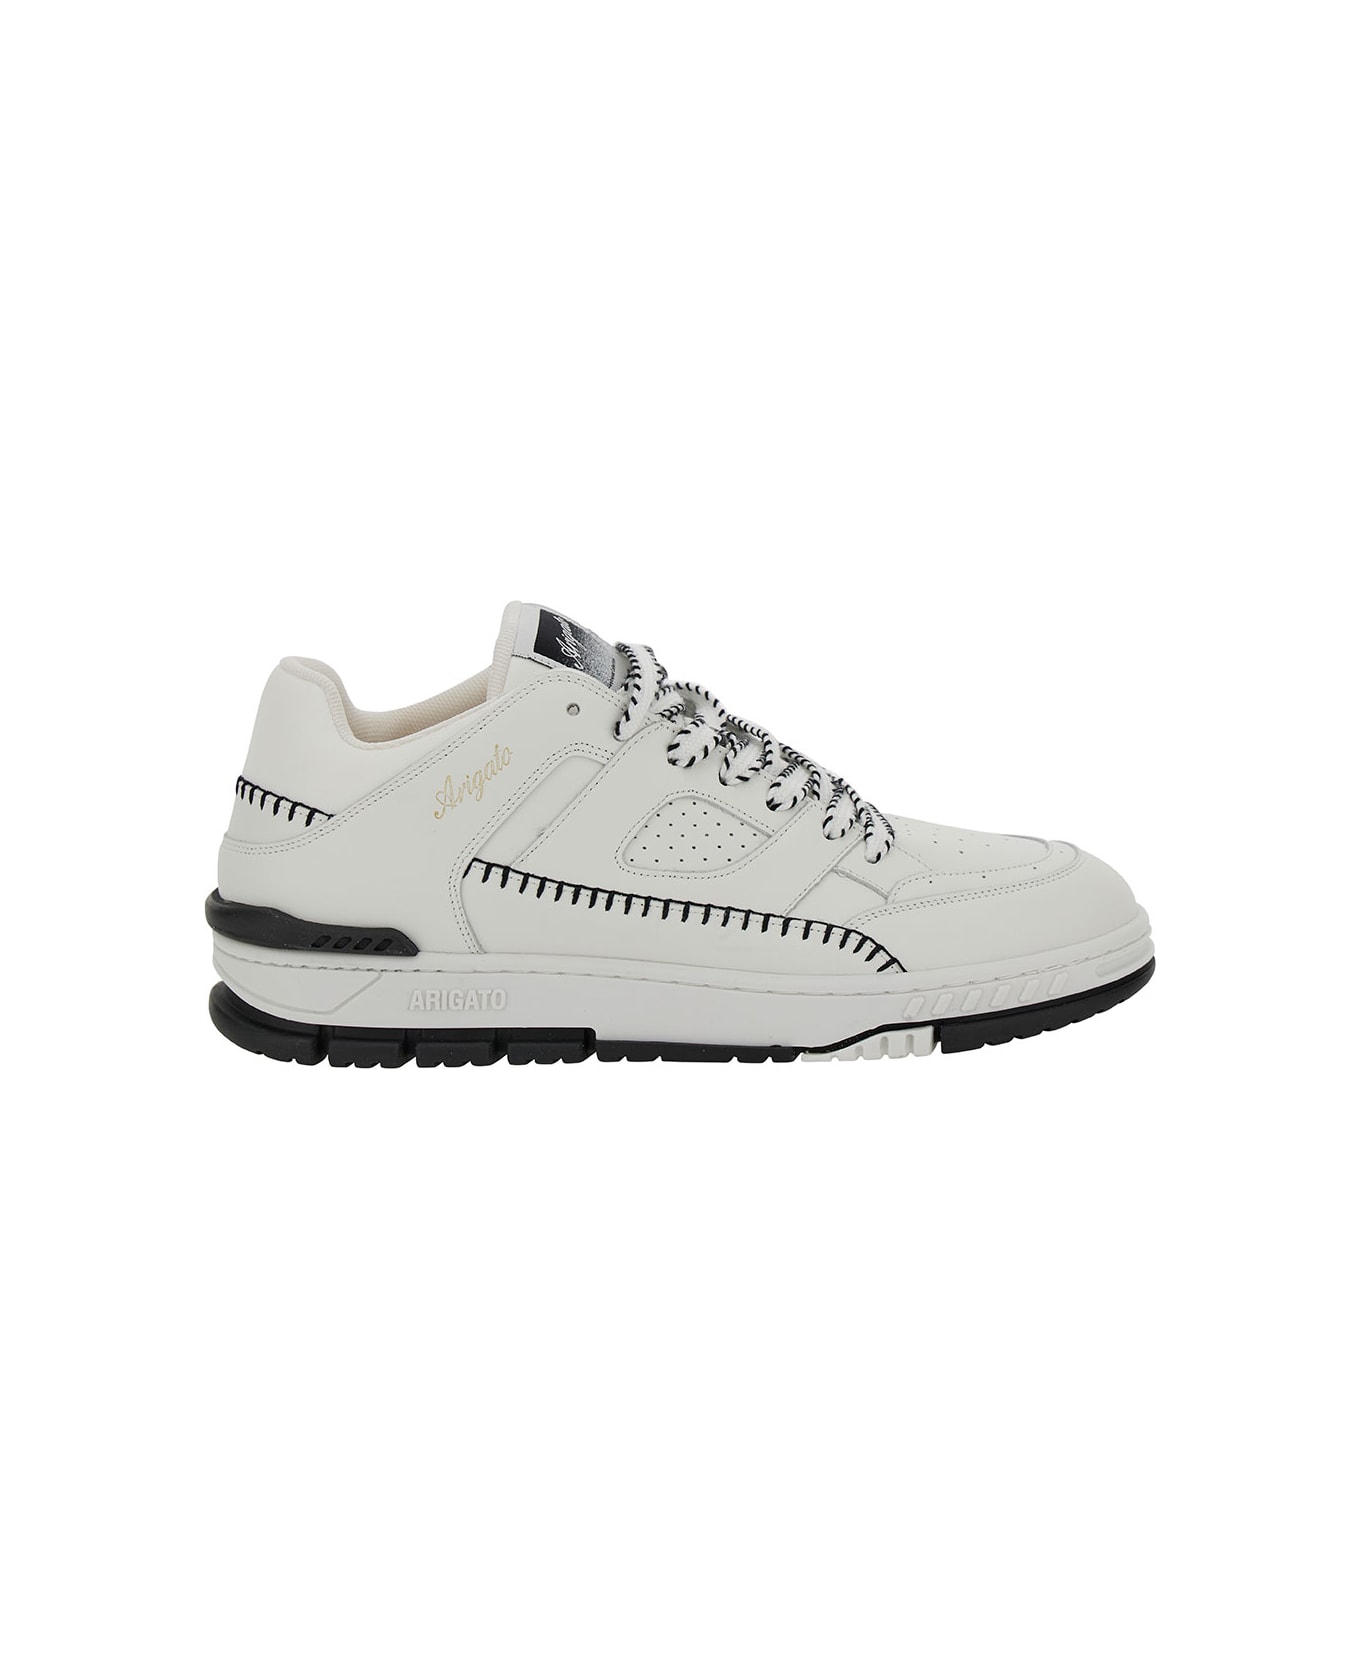 Axel Arigato 'area Lo Sneaker Stitch' White Low Top Sneakers With Contrasting Stitch Detail In Leather Man - White Black スニーカー